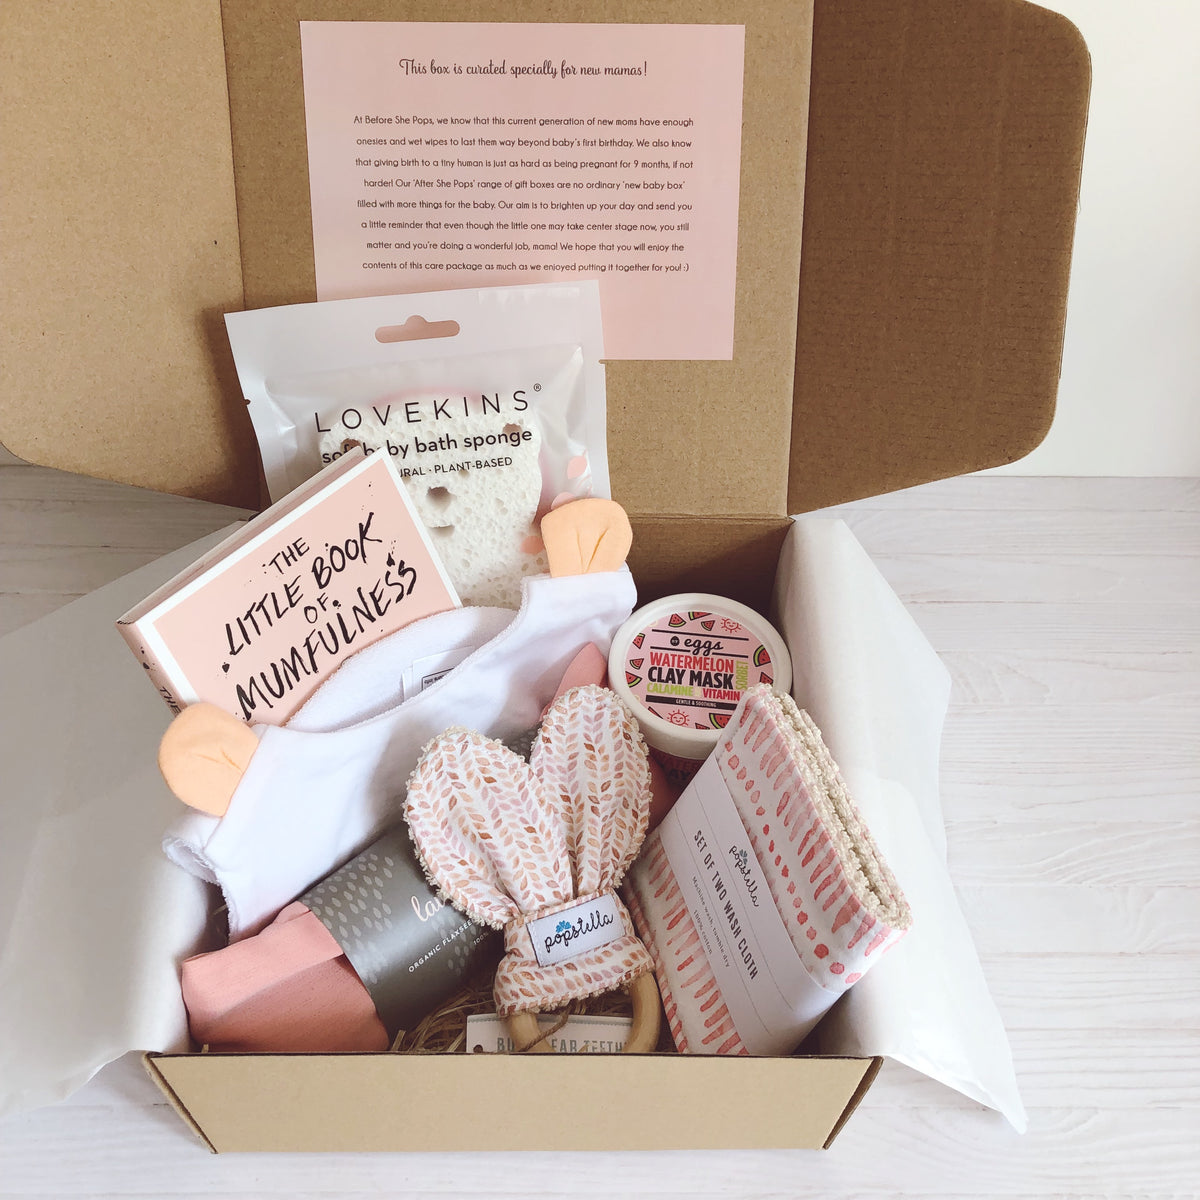 Before She Pops - Pregnancy Gift Boxes